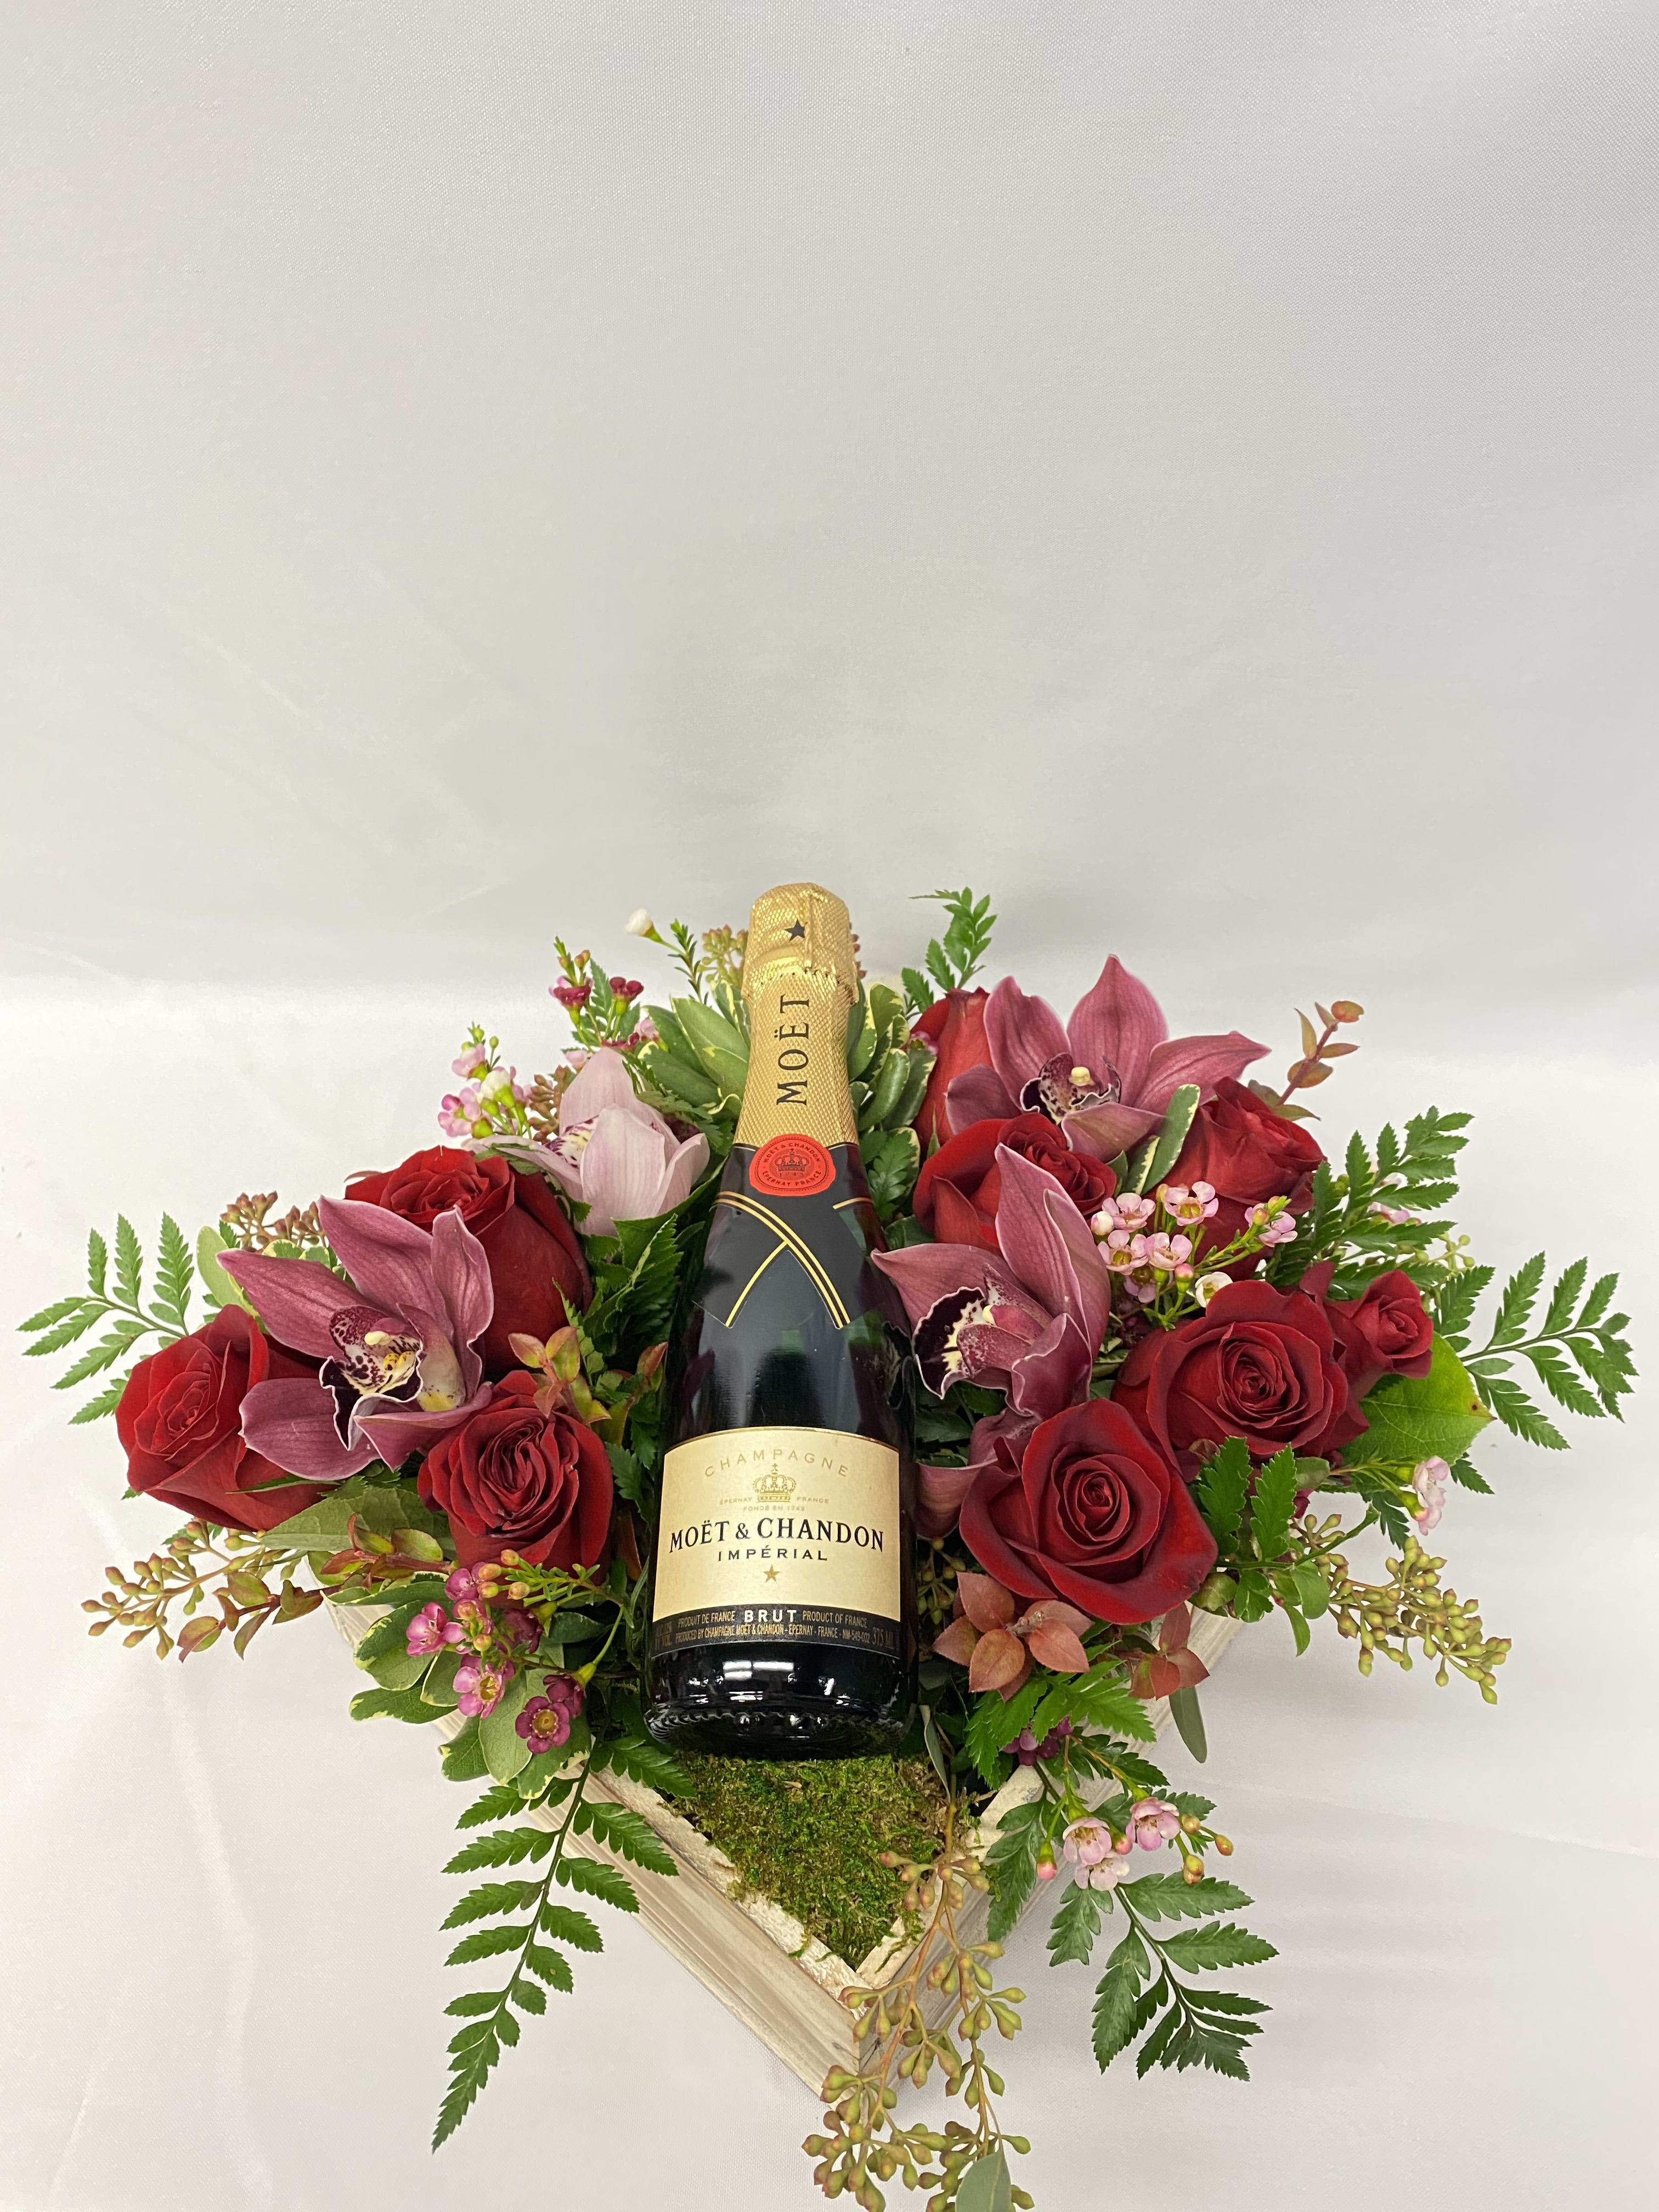 Champagne and Roses - A classic romantic combination. This arrangement includes red roses and orchids along with a 375 ml bottle of Moet &amp; Chandon champagne. 